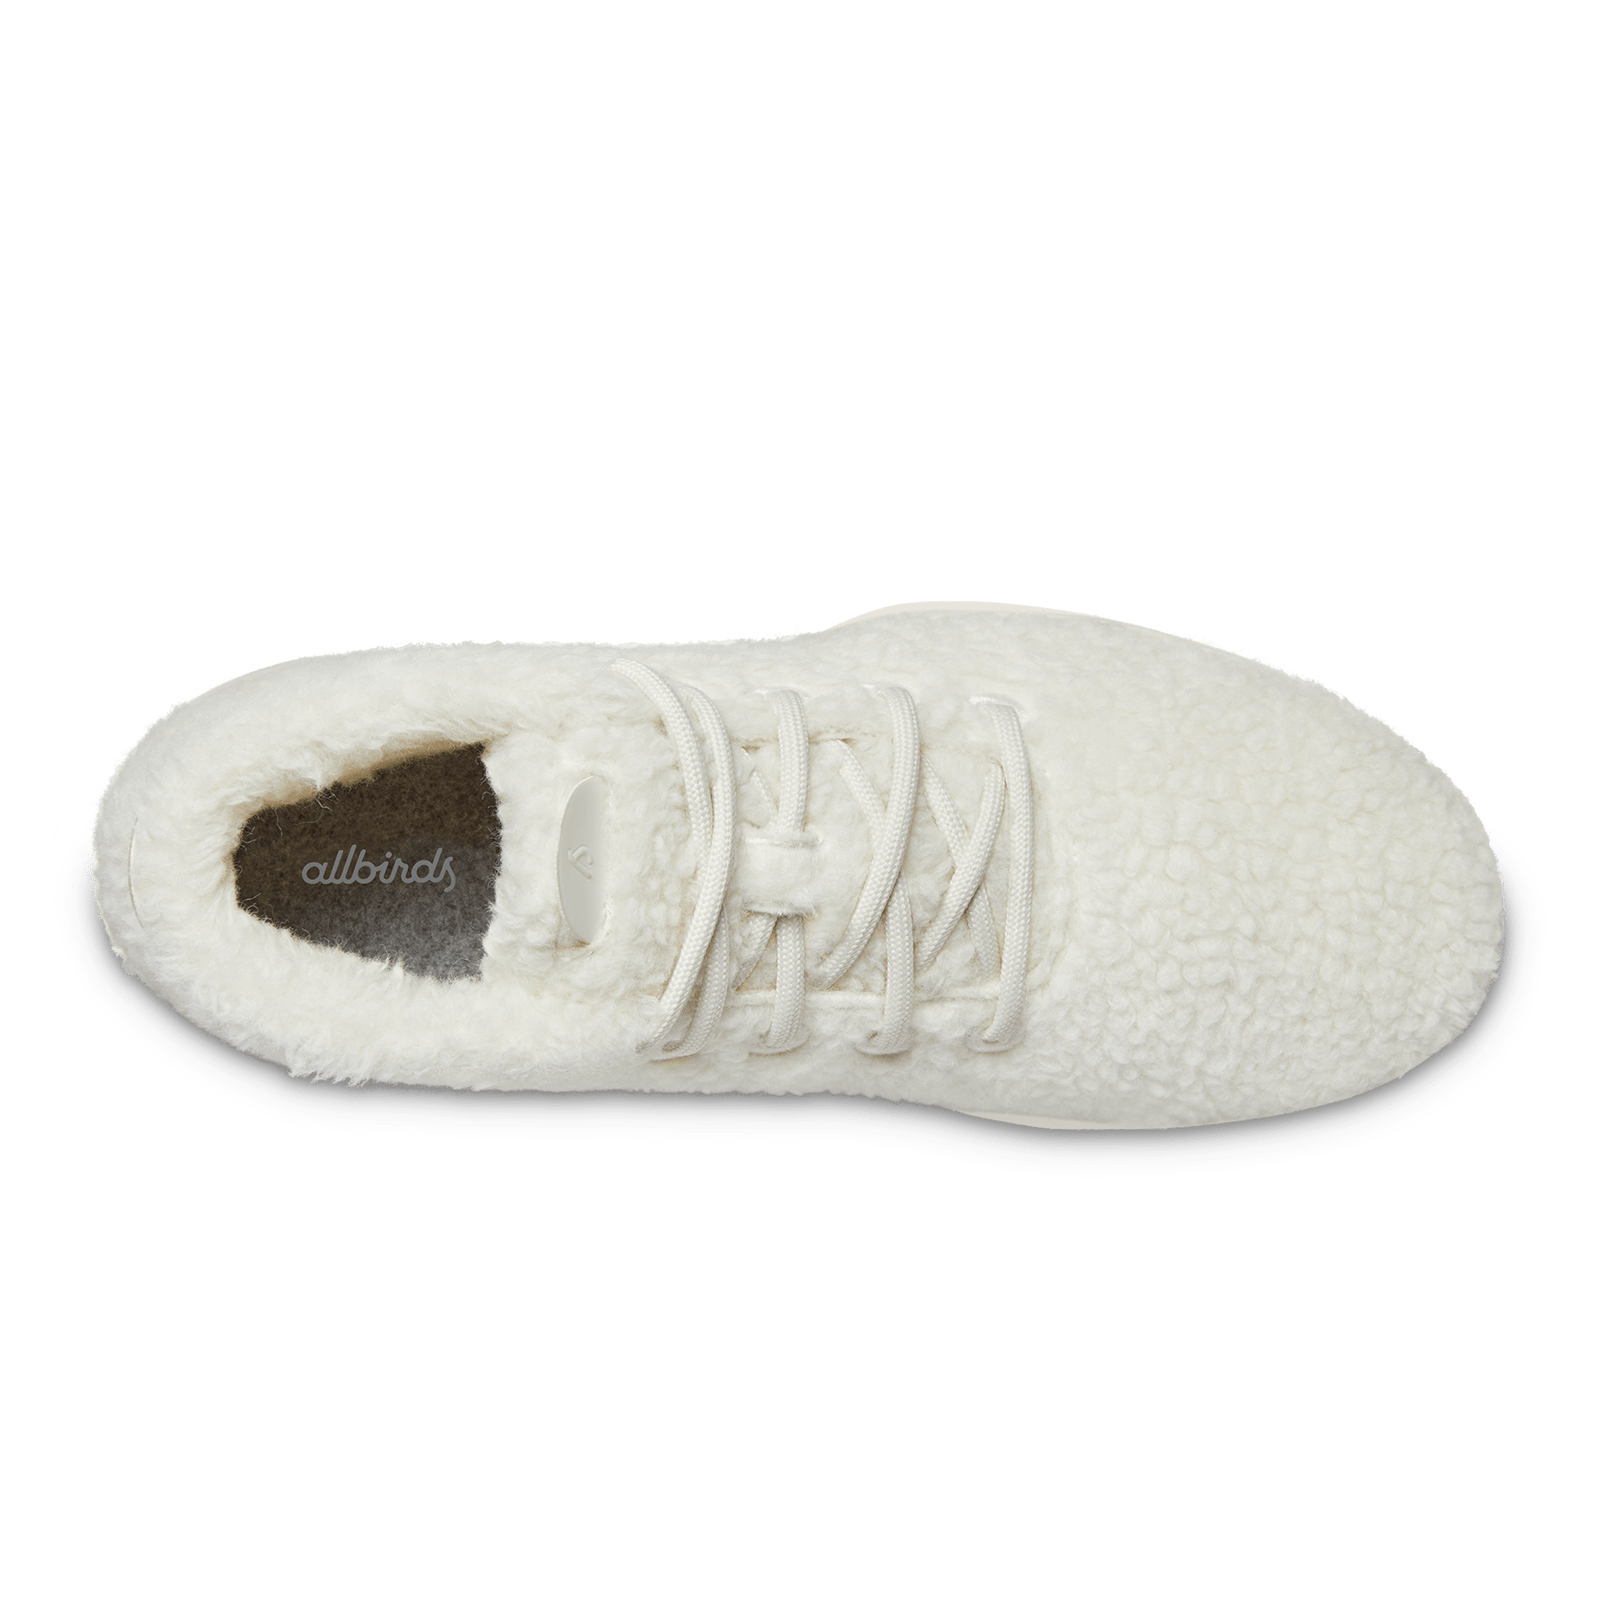 Men's Wool Runner-up Fluffs - Natural White (Natural White Sole)